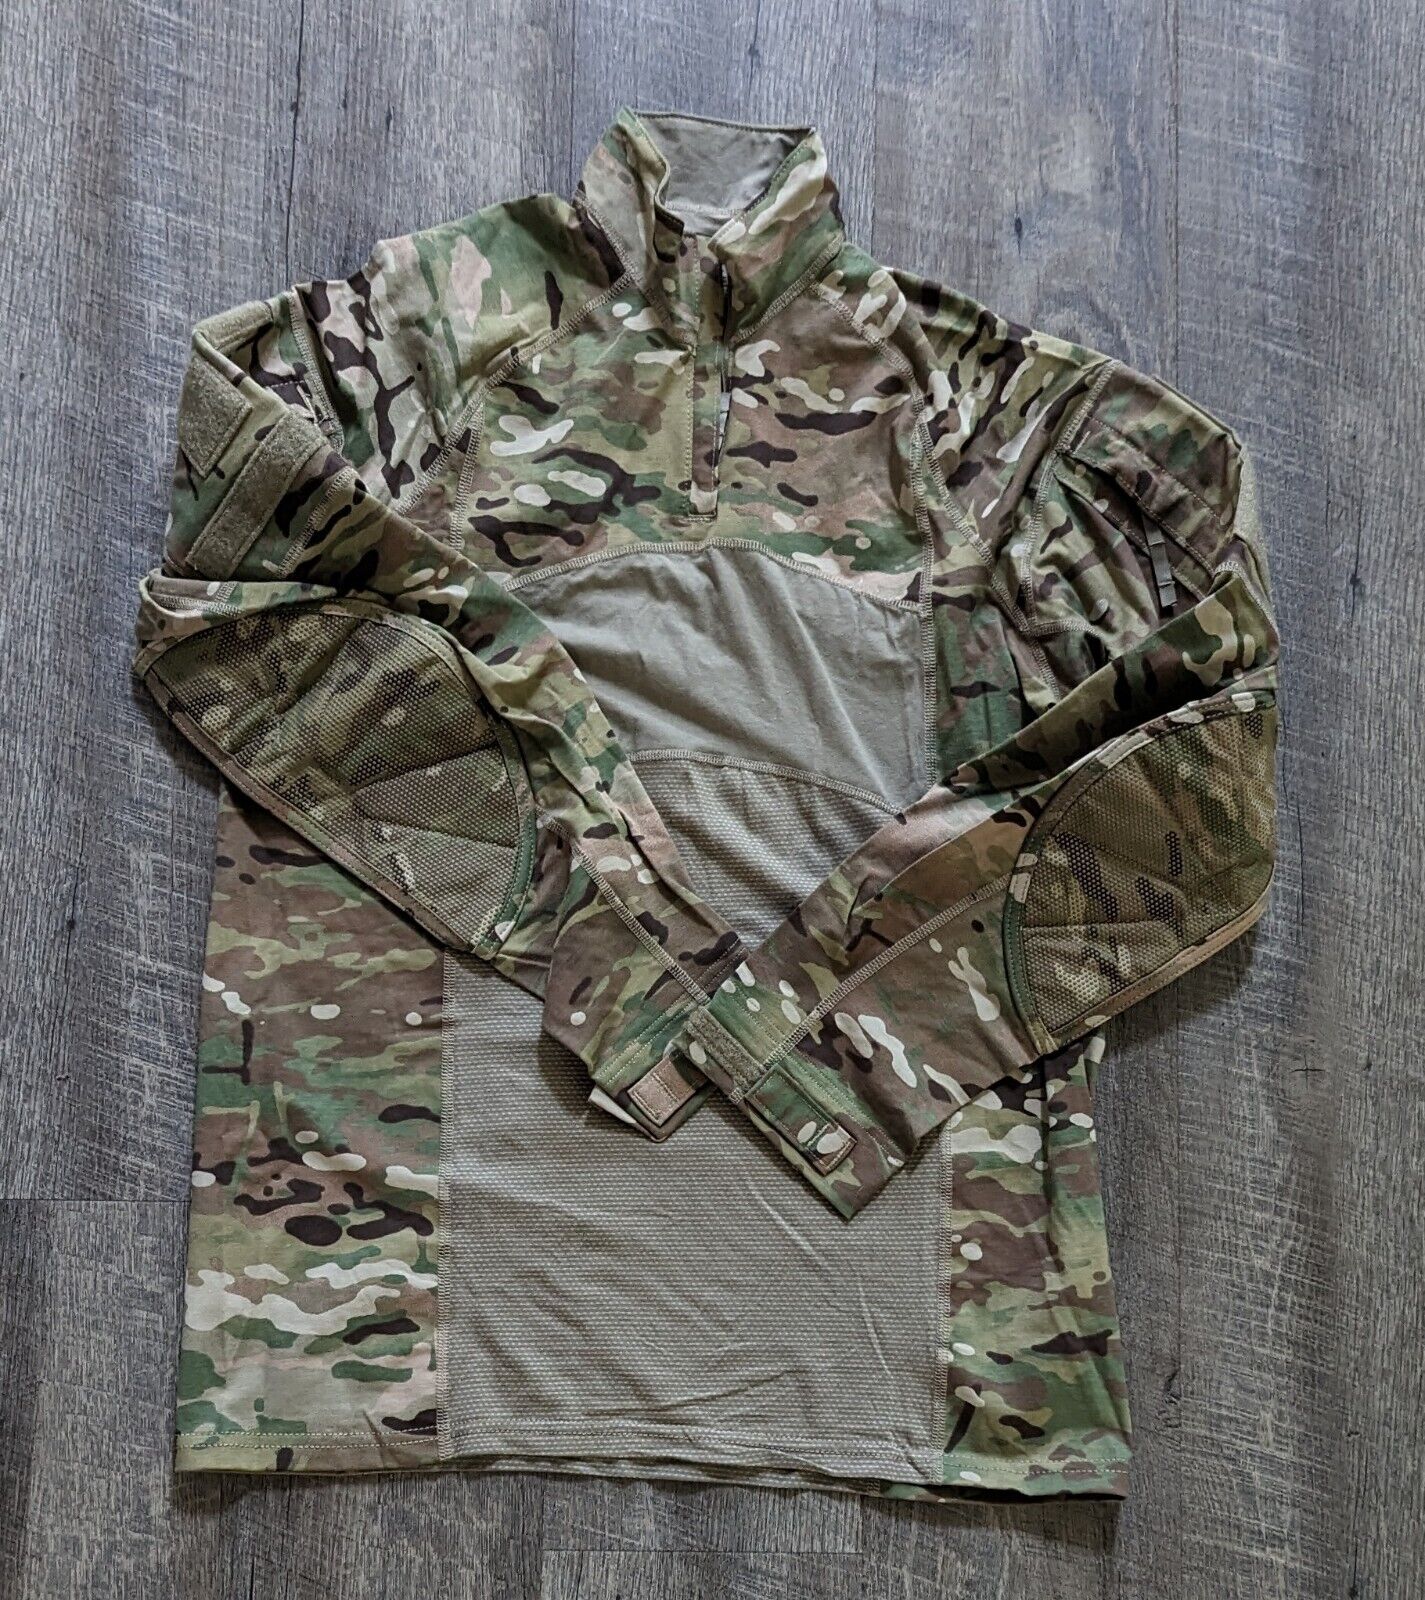 Army Combat Shirt Flame Resistant XL OCP 8415-01-617-7134 Brand New